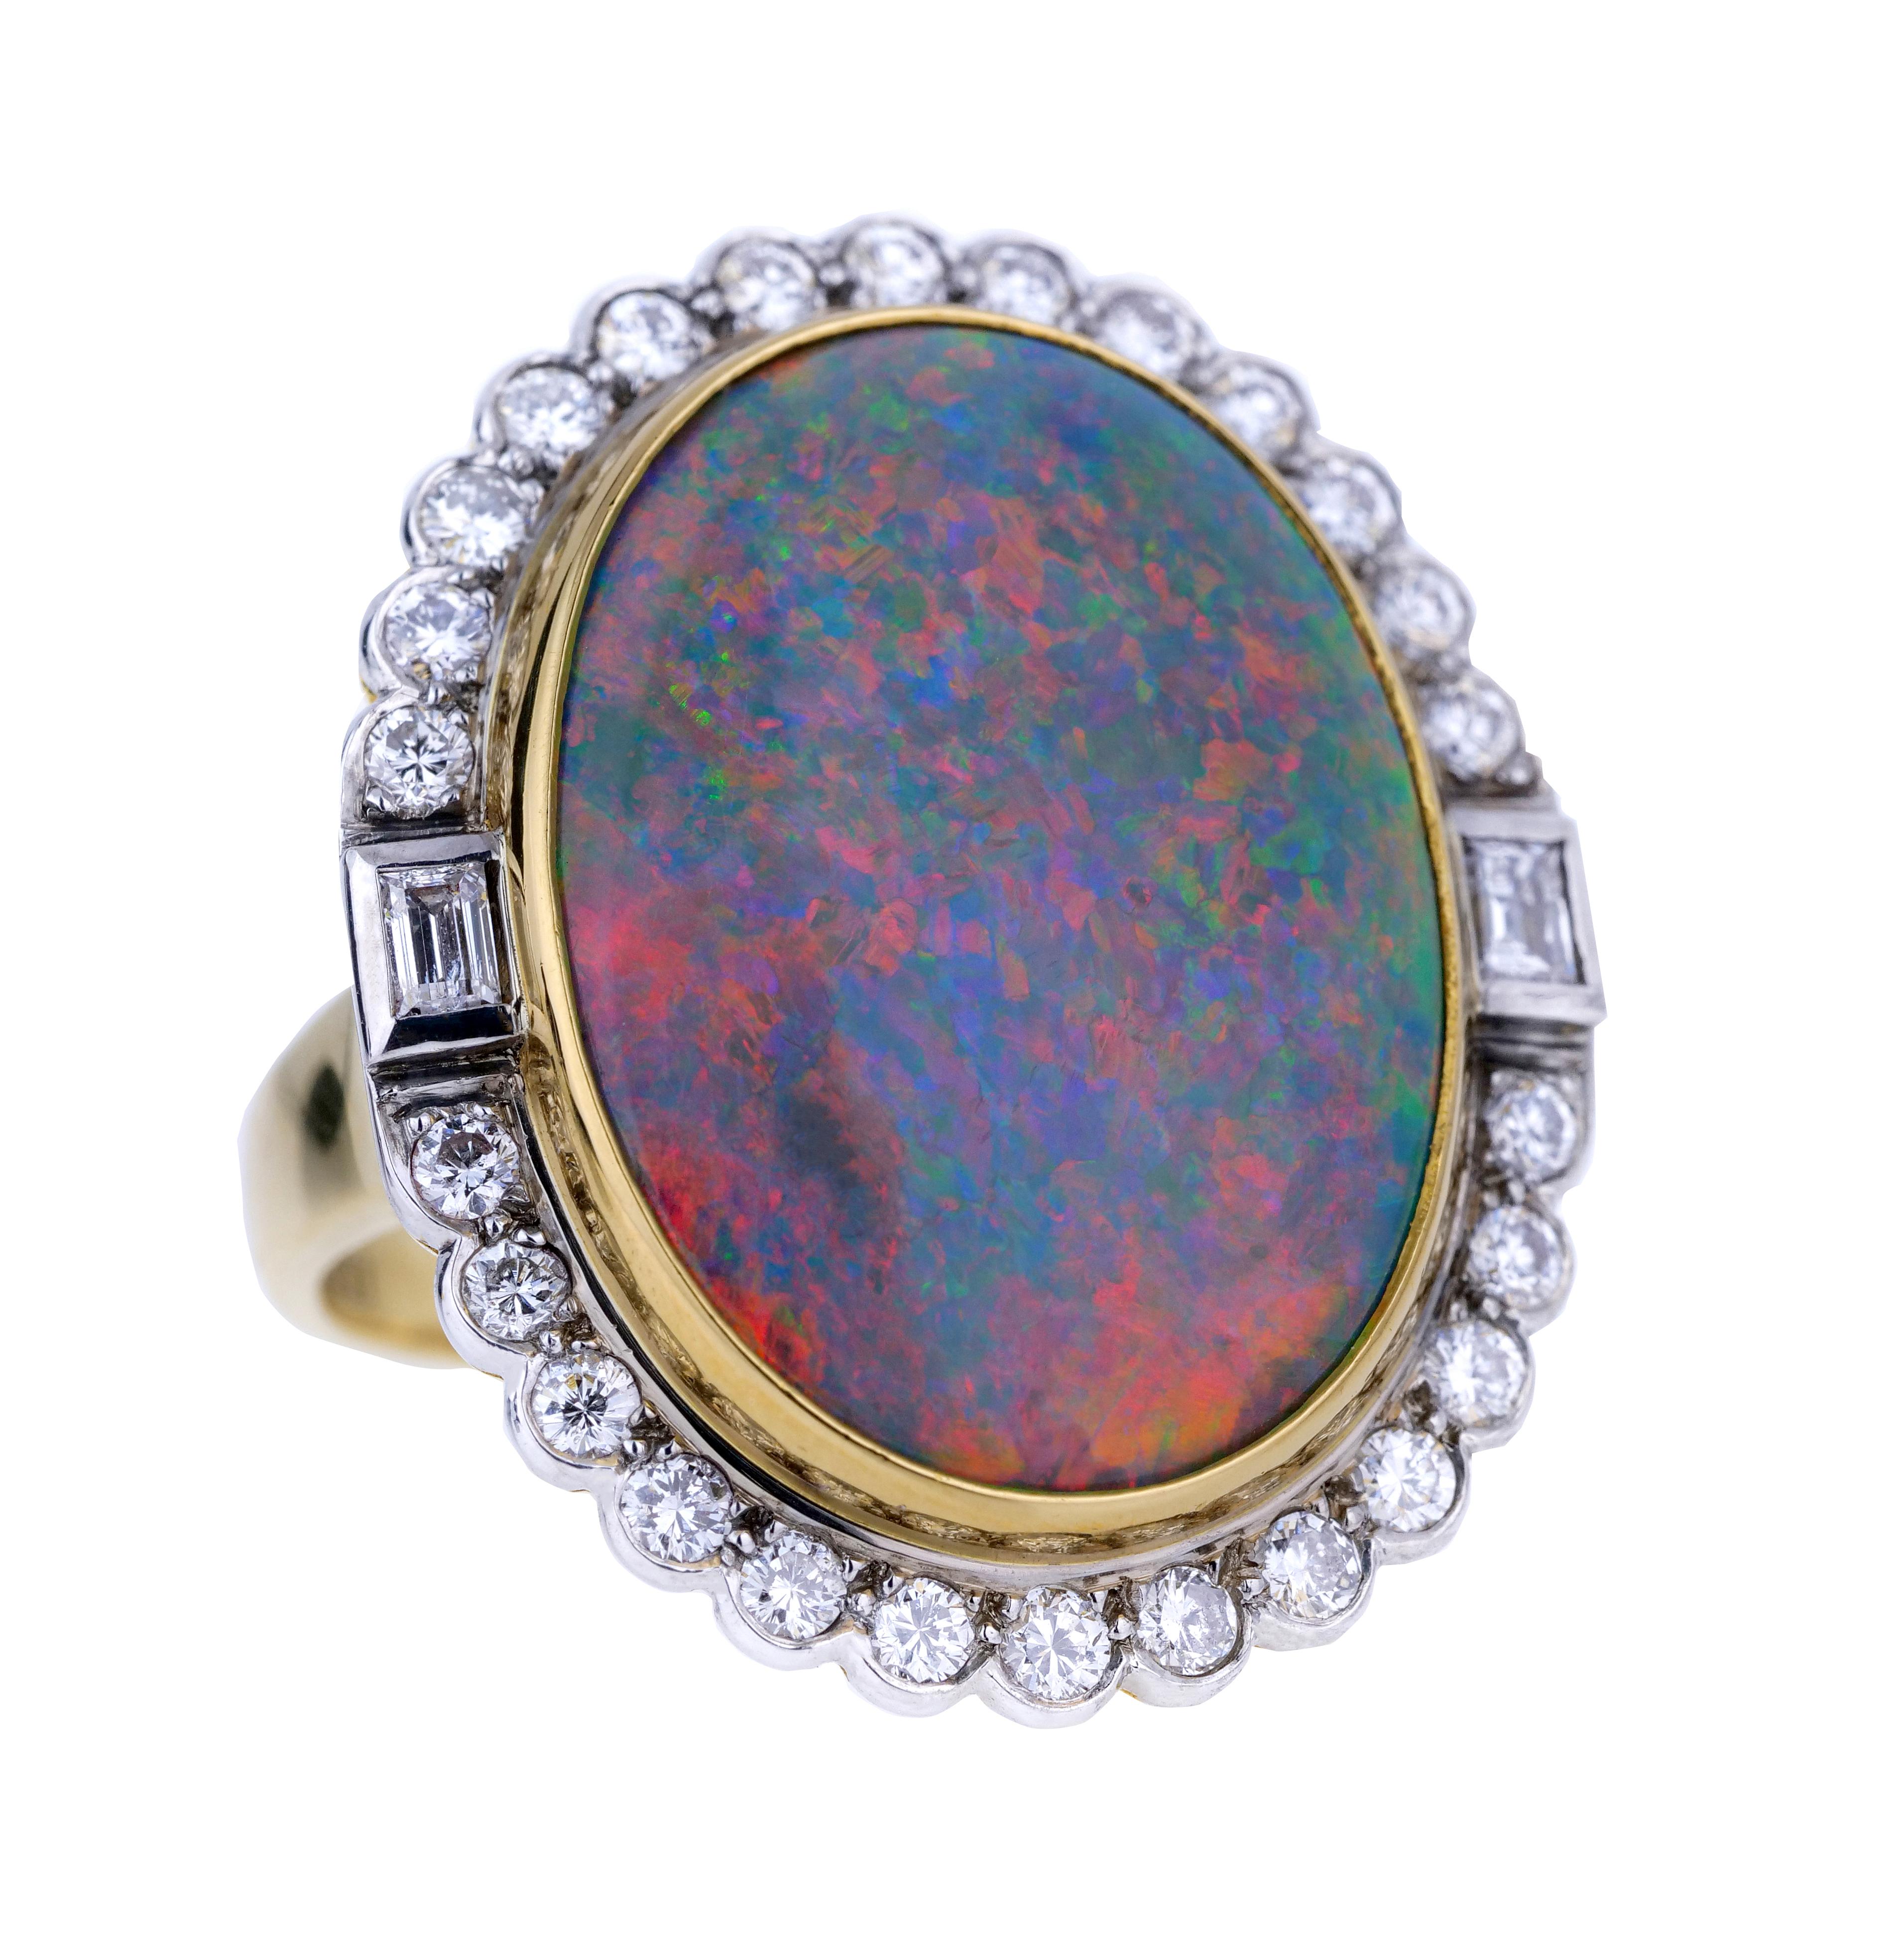 A stunning 18 carat gold Australian opal and diamond dress ring , the natural opal shimmering with vibrant shades of red, orange and green with hints of yellow and electric blue, all on a pale blue background bordered by bright white round brilliant